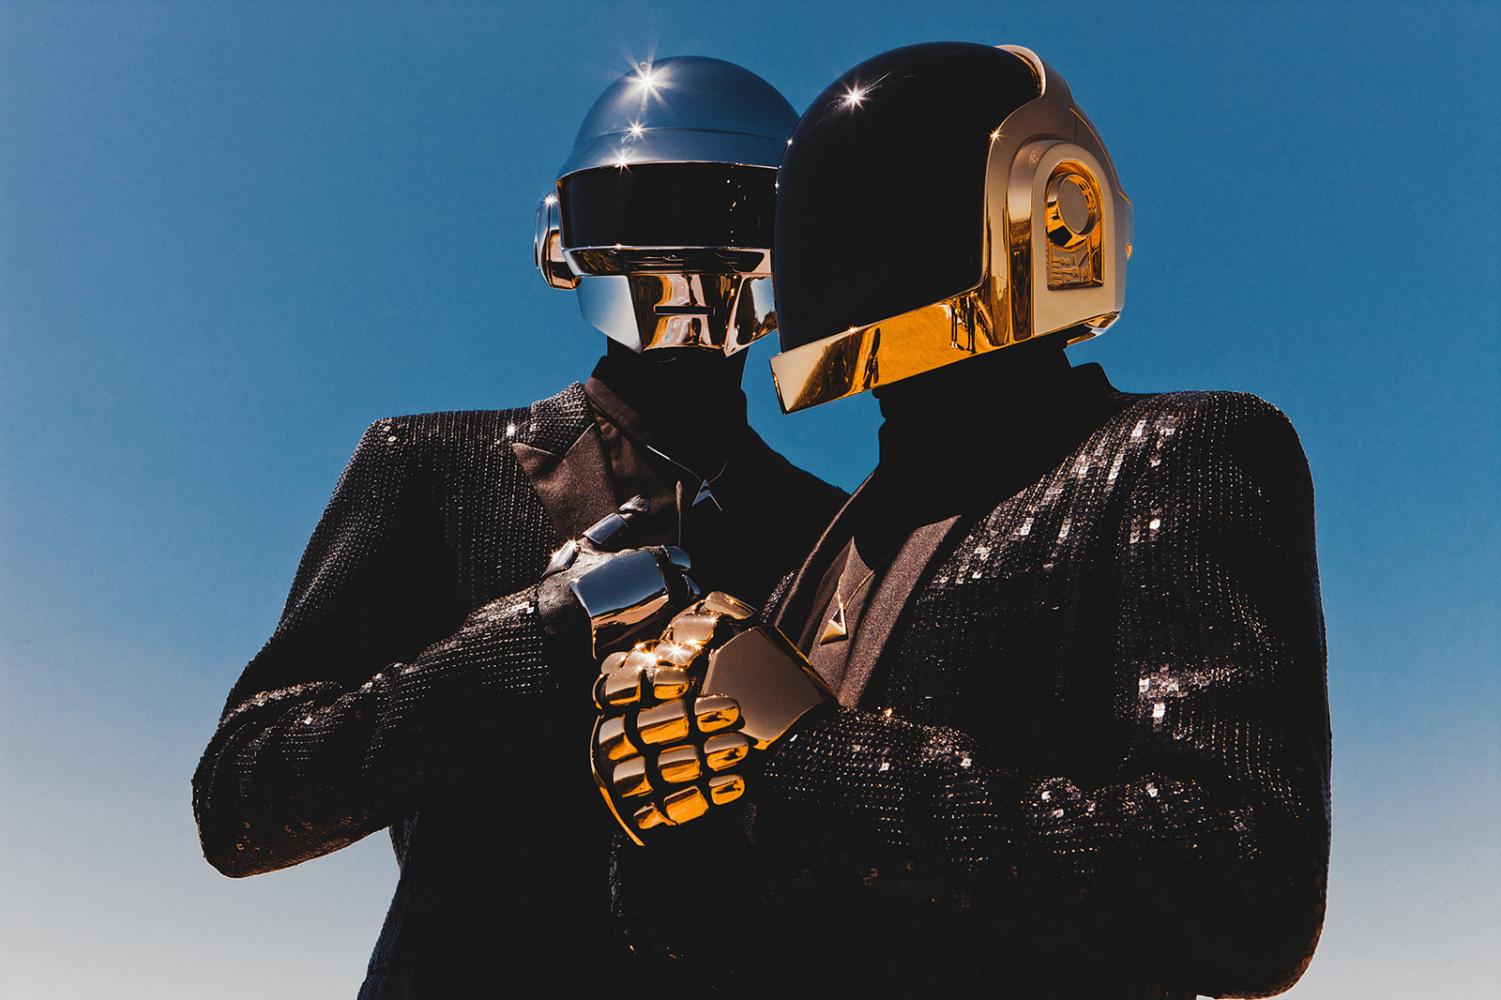 Column: Looking back at 28 years of Daft Punk – The Daily Aztec